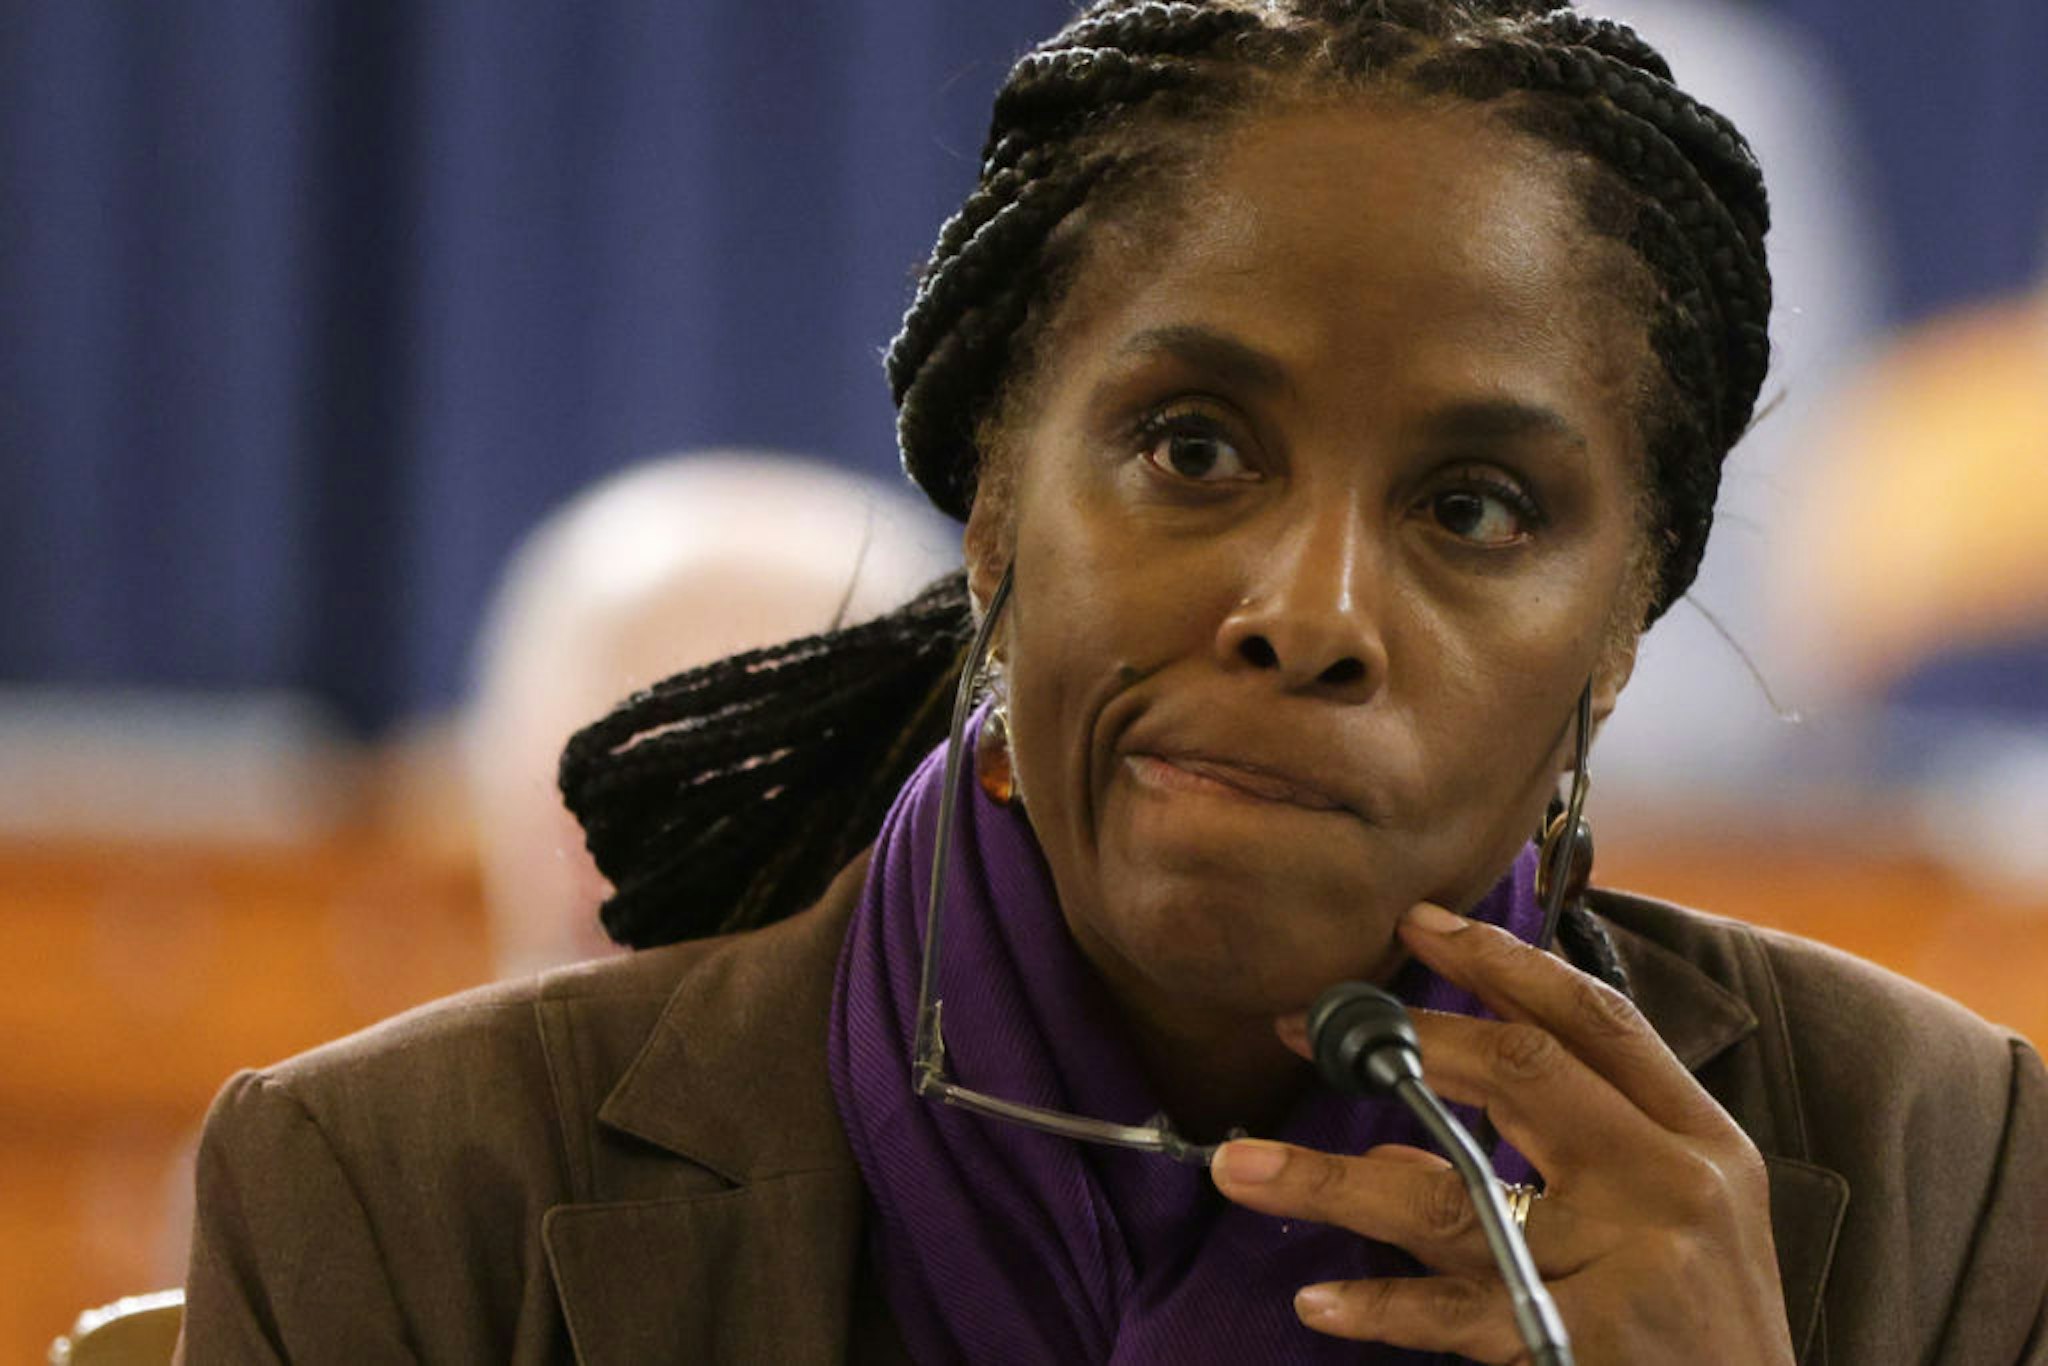 WASHINGTON, DC - SEPTEMBER 14: U.S. Rep. Stacey Plaskett (D-VI) listens during a markup hearing at Longworth House Office Building September 14, 2021 on Capitol Hill in Washington, DC. House Ways And Means Committee continued its markup on a third day for the Democrats' $3.5 trillion spending package. (Photo by Alex Wong/Getty Images)